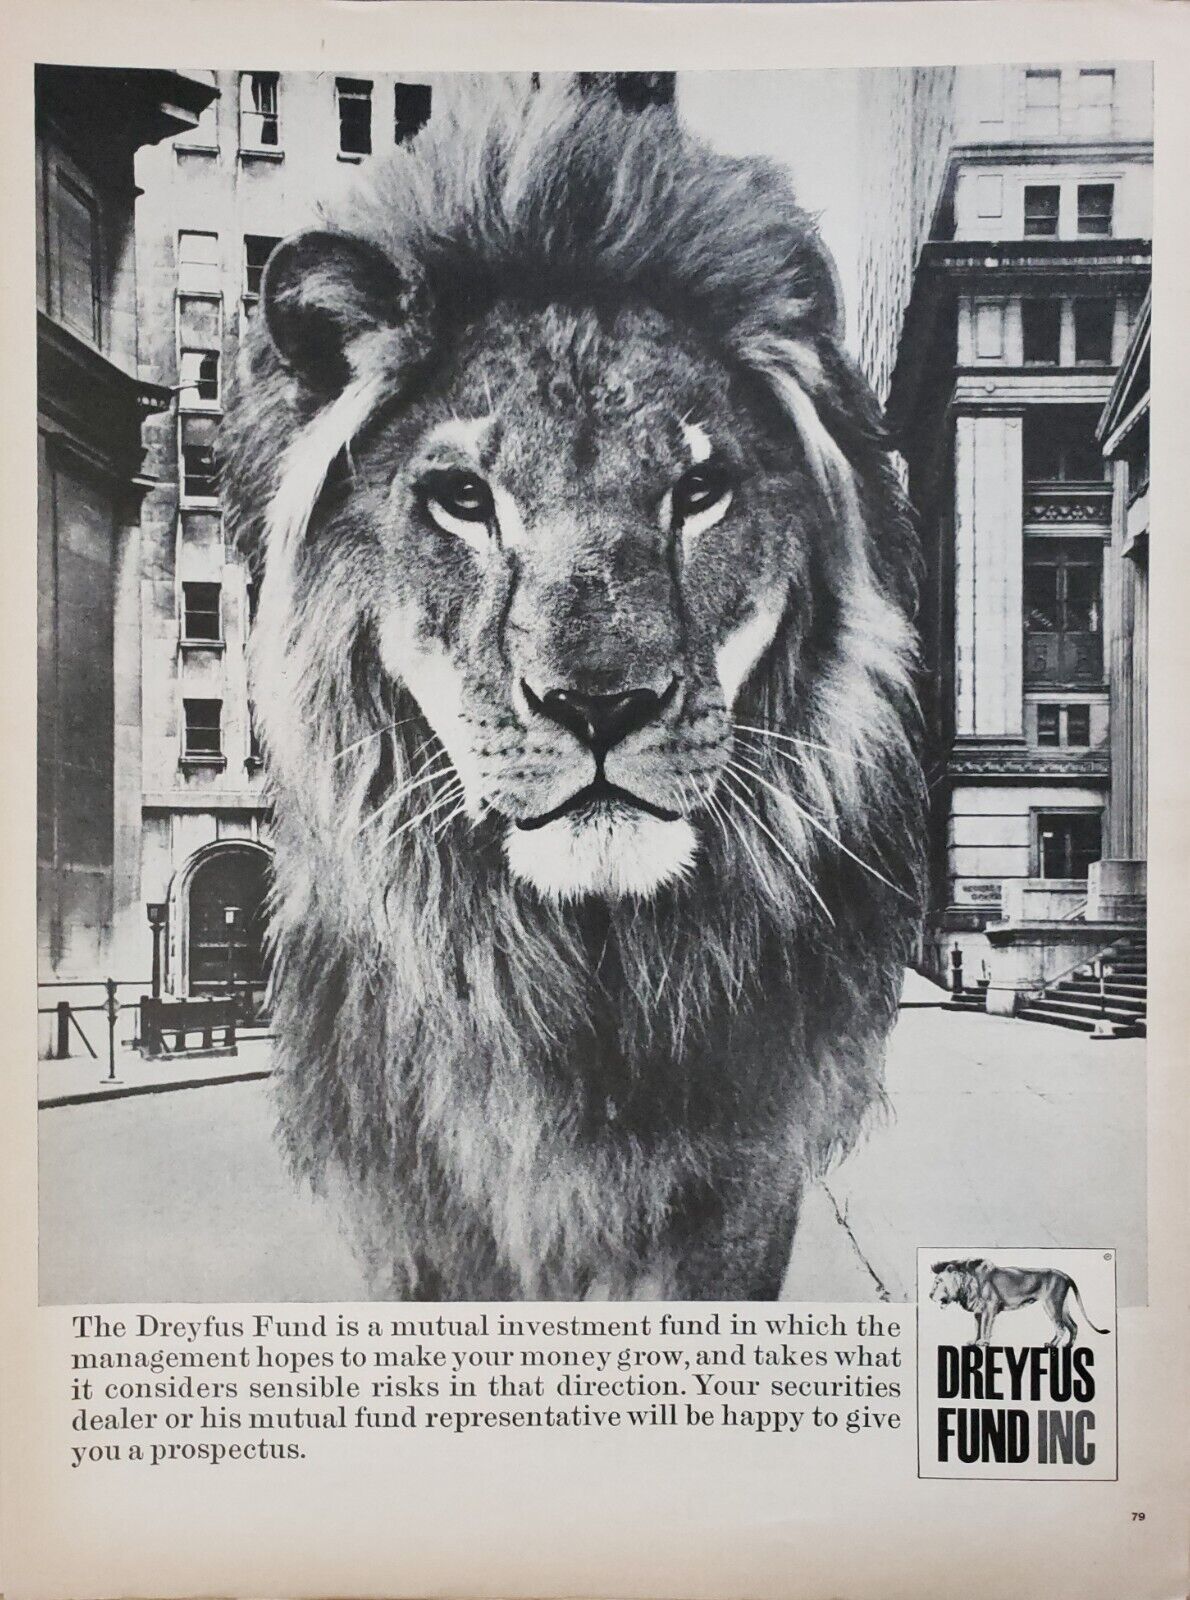 1968 Dreyfus Fund Inc Mutual Investment Fund Hopes To Grow Money Print Ad